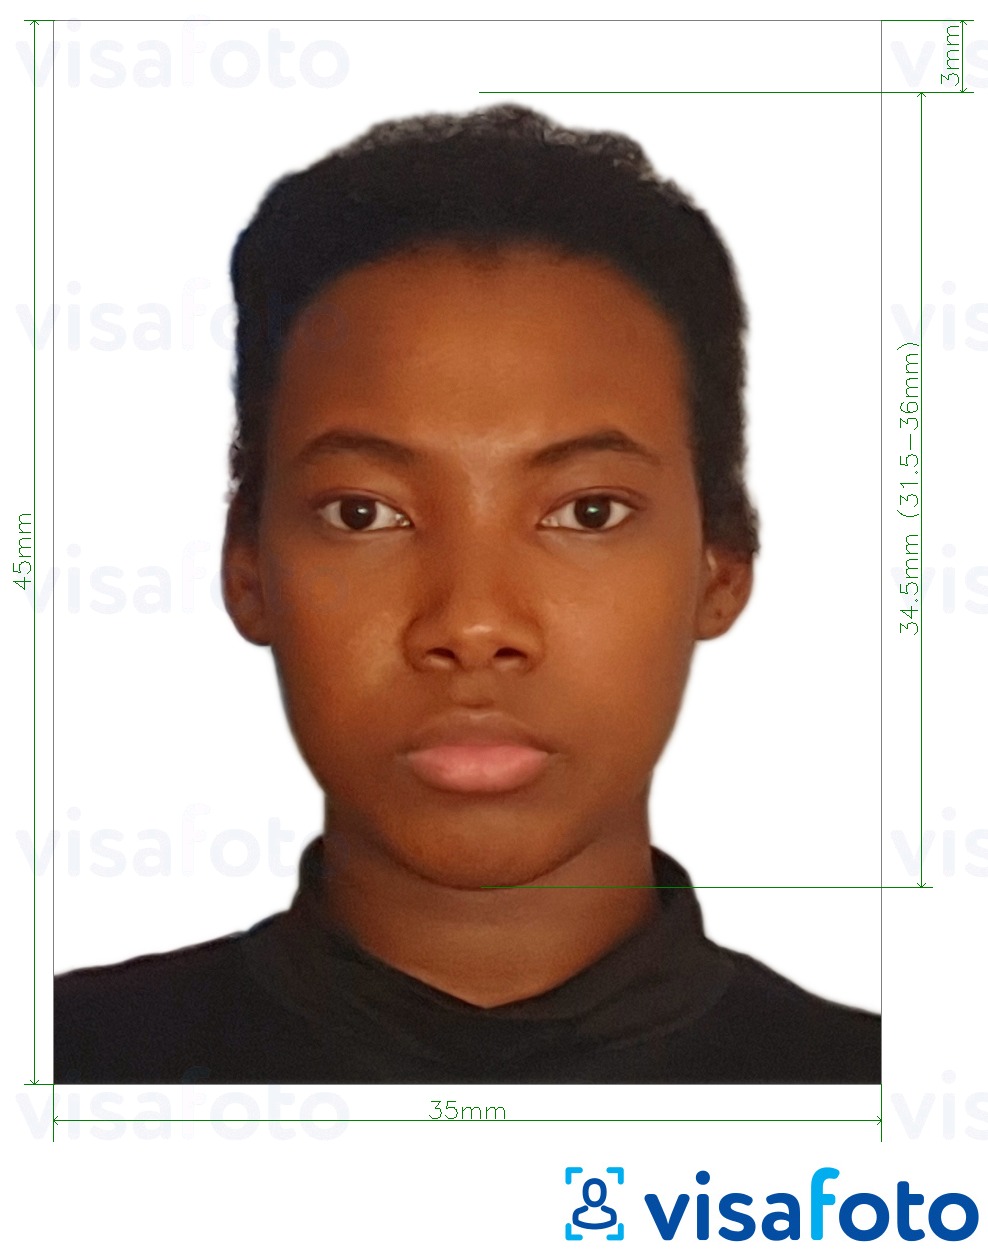 Example of photo for Guyana passport 45x35 mm (1.77 x 1.38 inch) with exact size specification